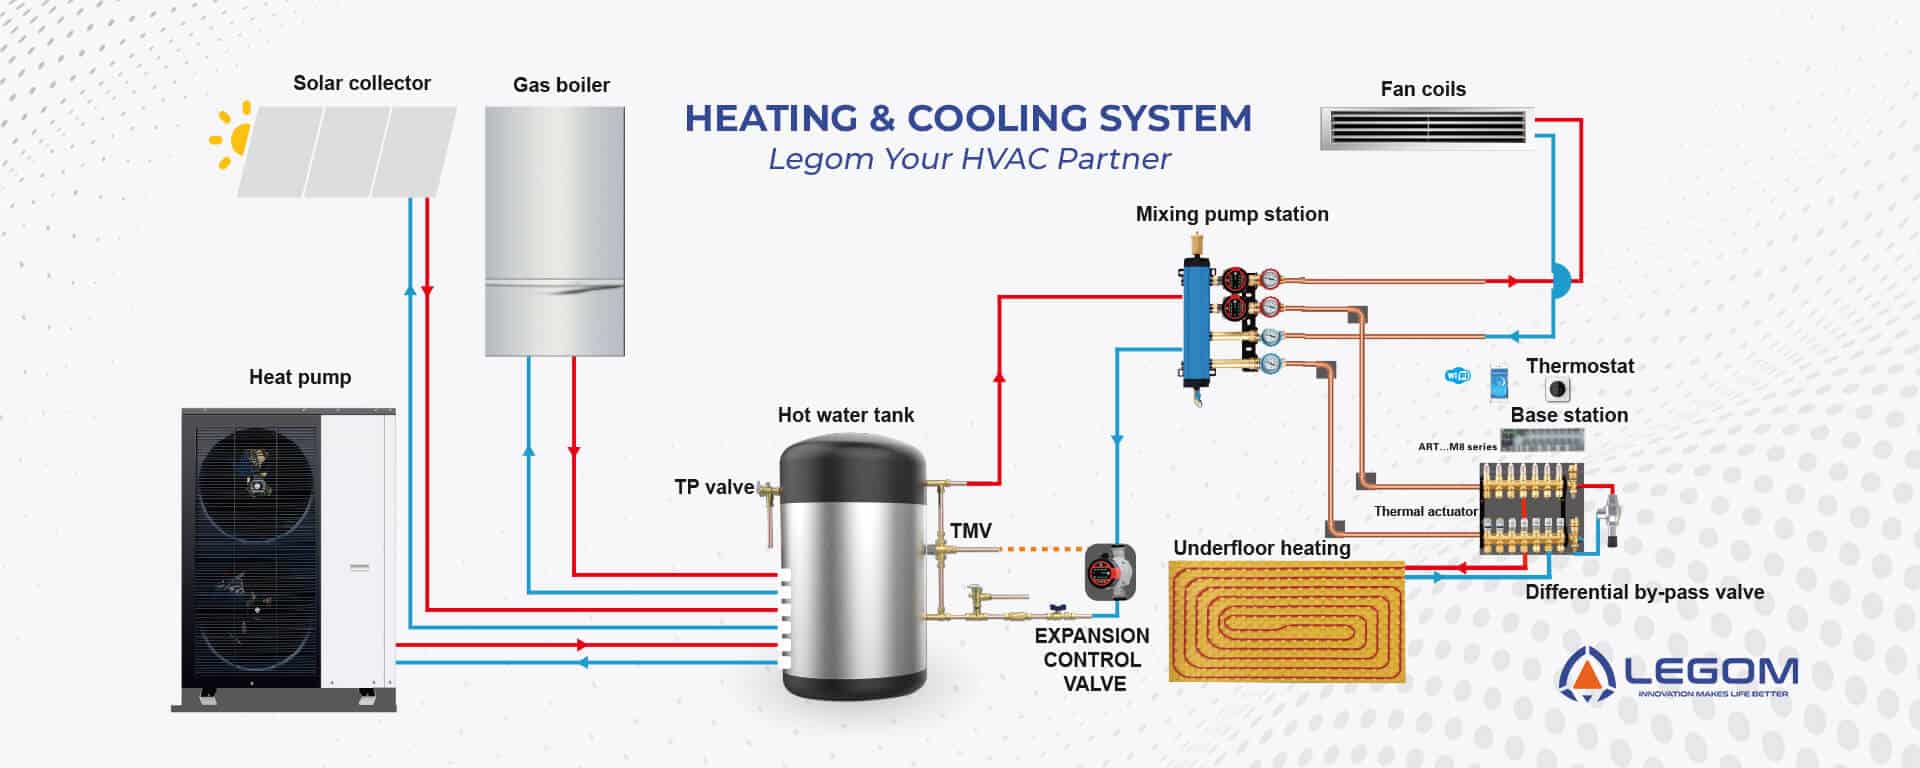 Heating and Cooling System by Legom